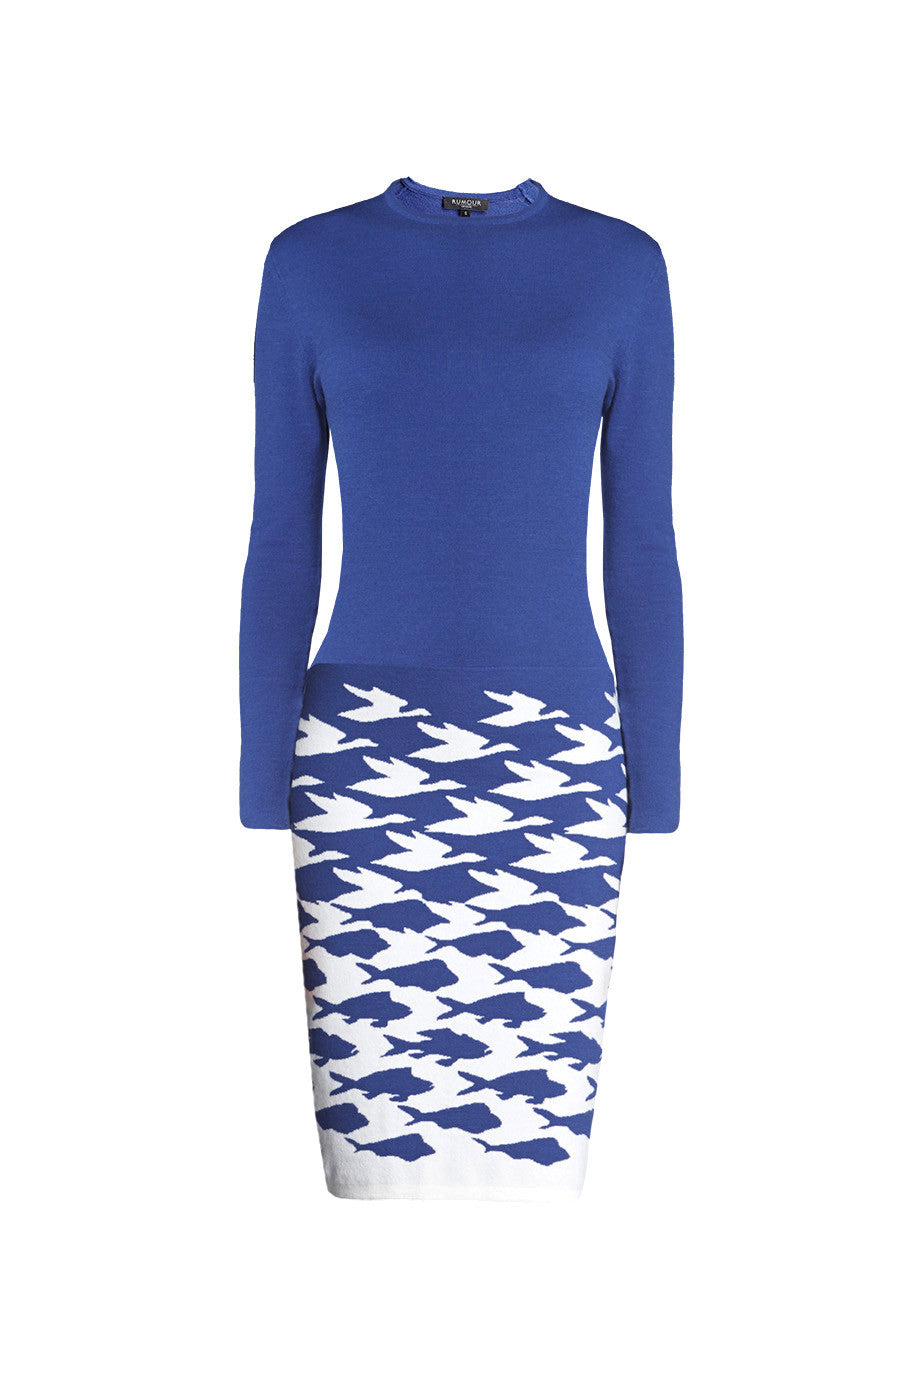 Azure blue illusion houndstooth knitted jacquard dress